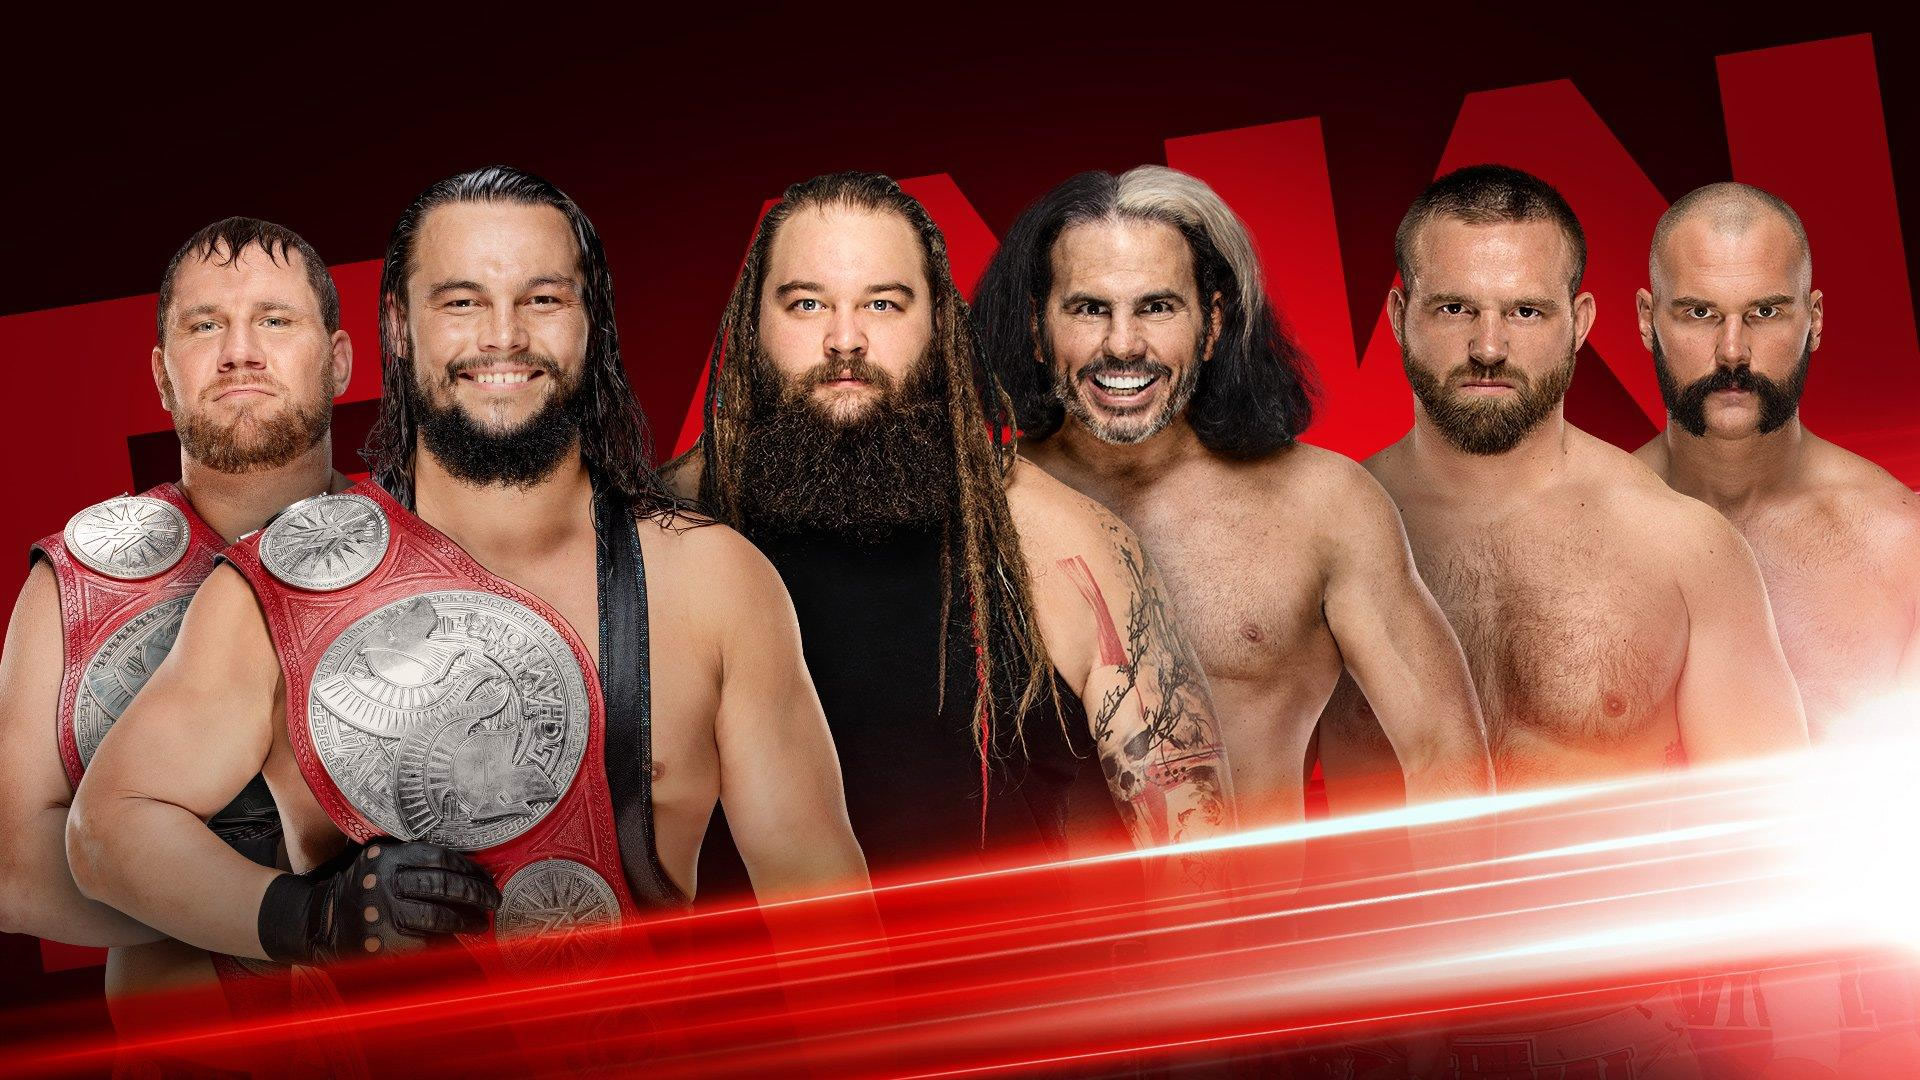 Wwe Raw Results Wrestleview Live WWE Raw Results 3/16/20 (Live from